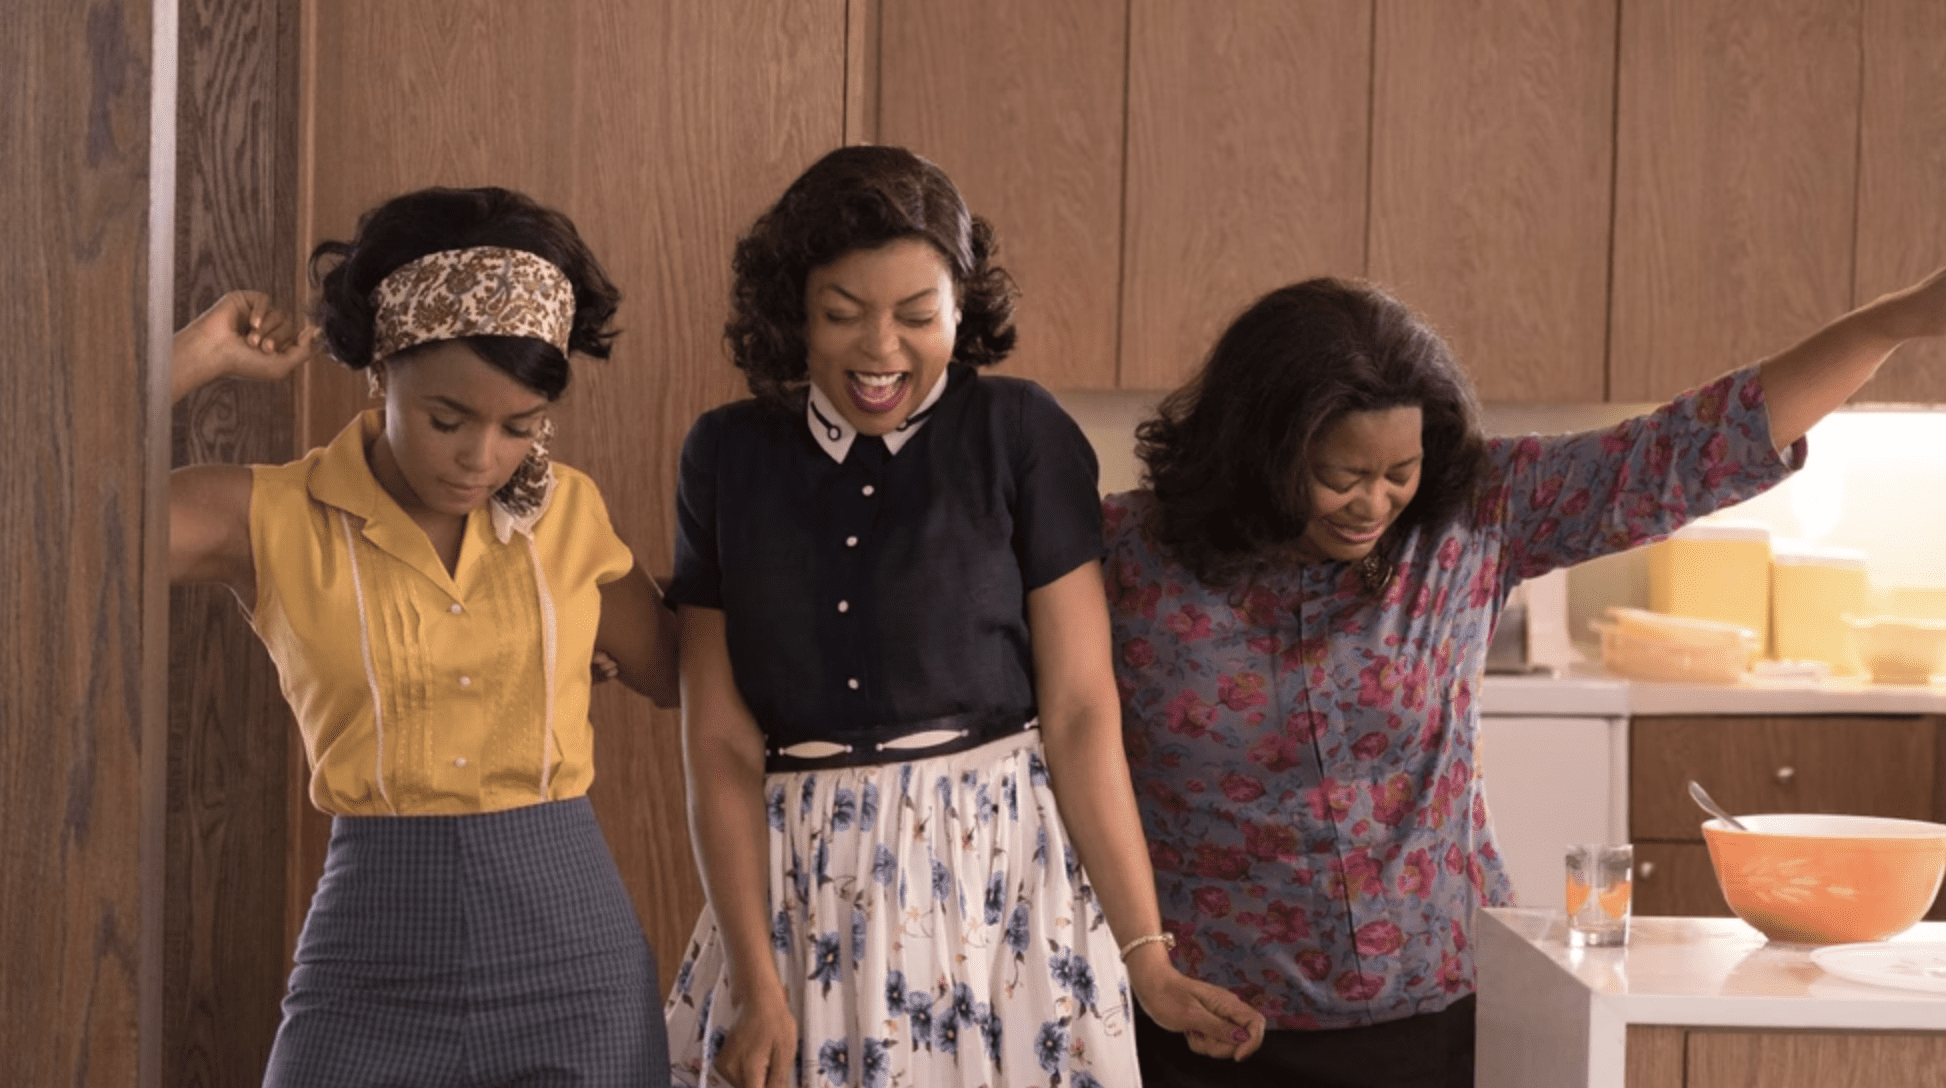 Three Black women celebrate together in this photo from Disney Plus.